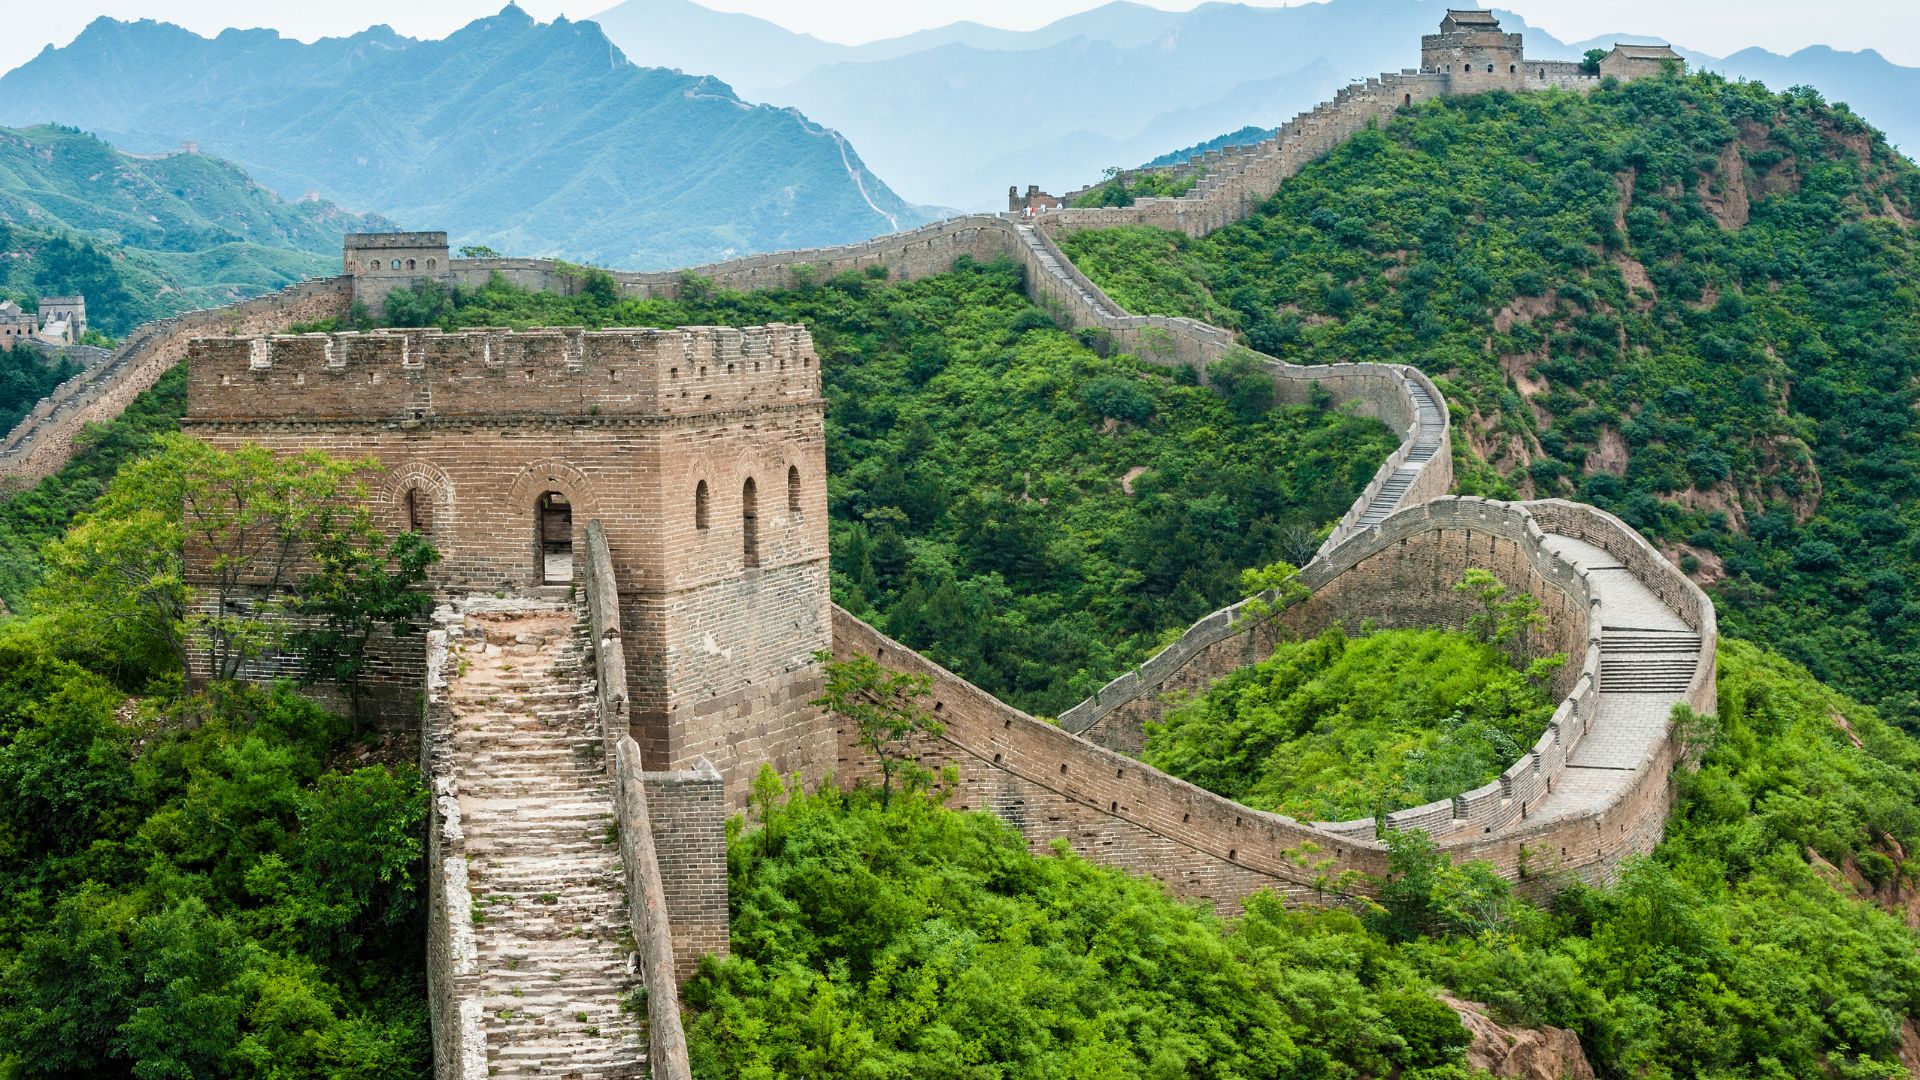 Episode 12 The Great Wall of China